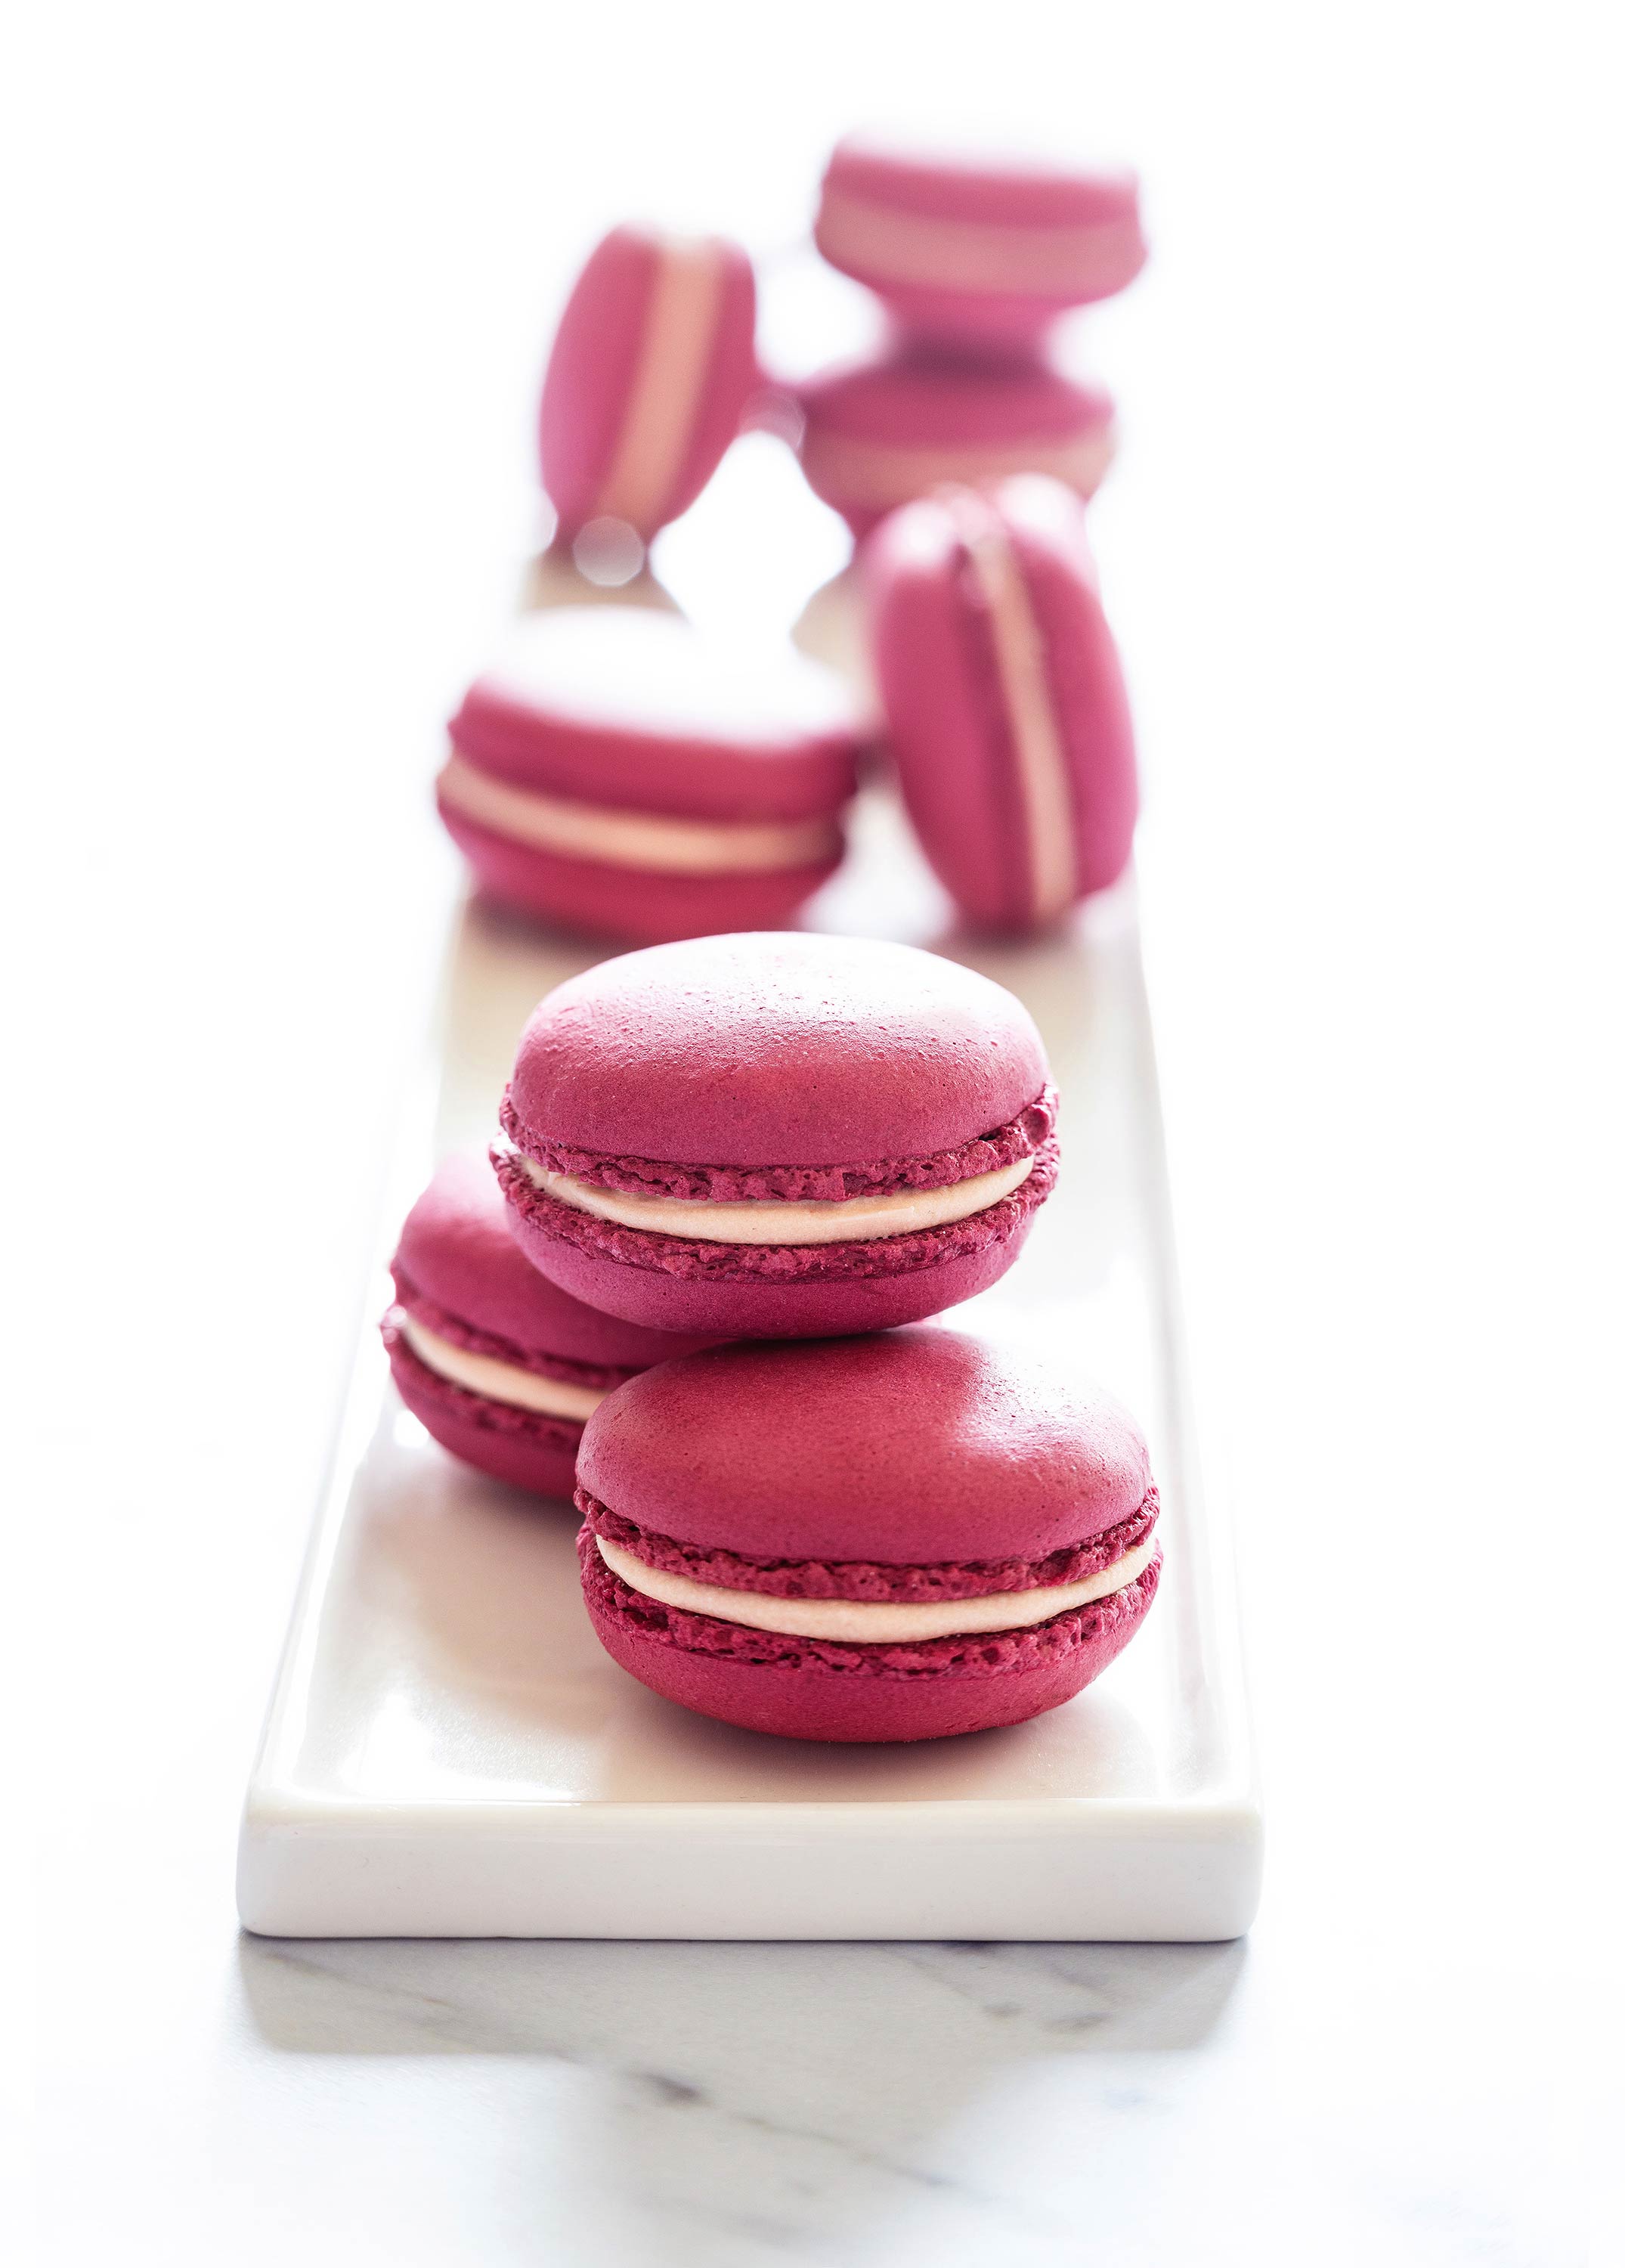 Glanger Photography I Dallas, TX Plate of Macaroons, Macarons 